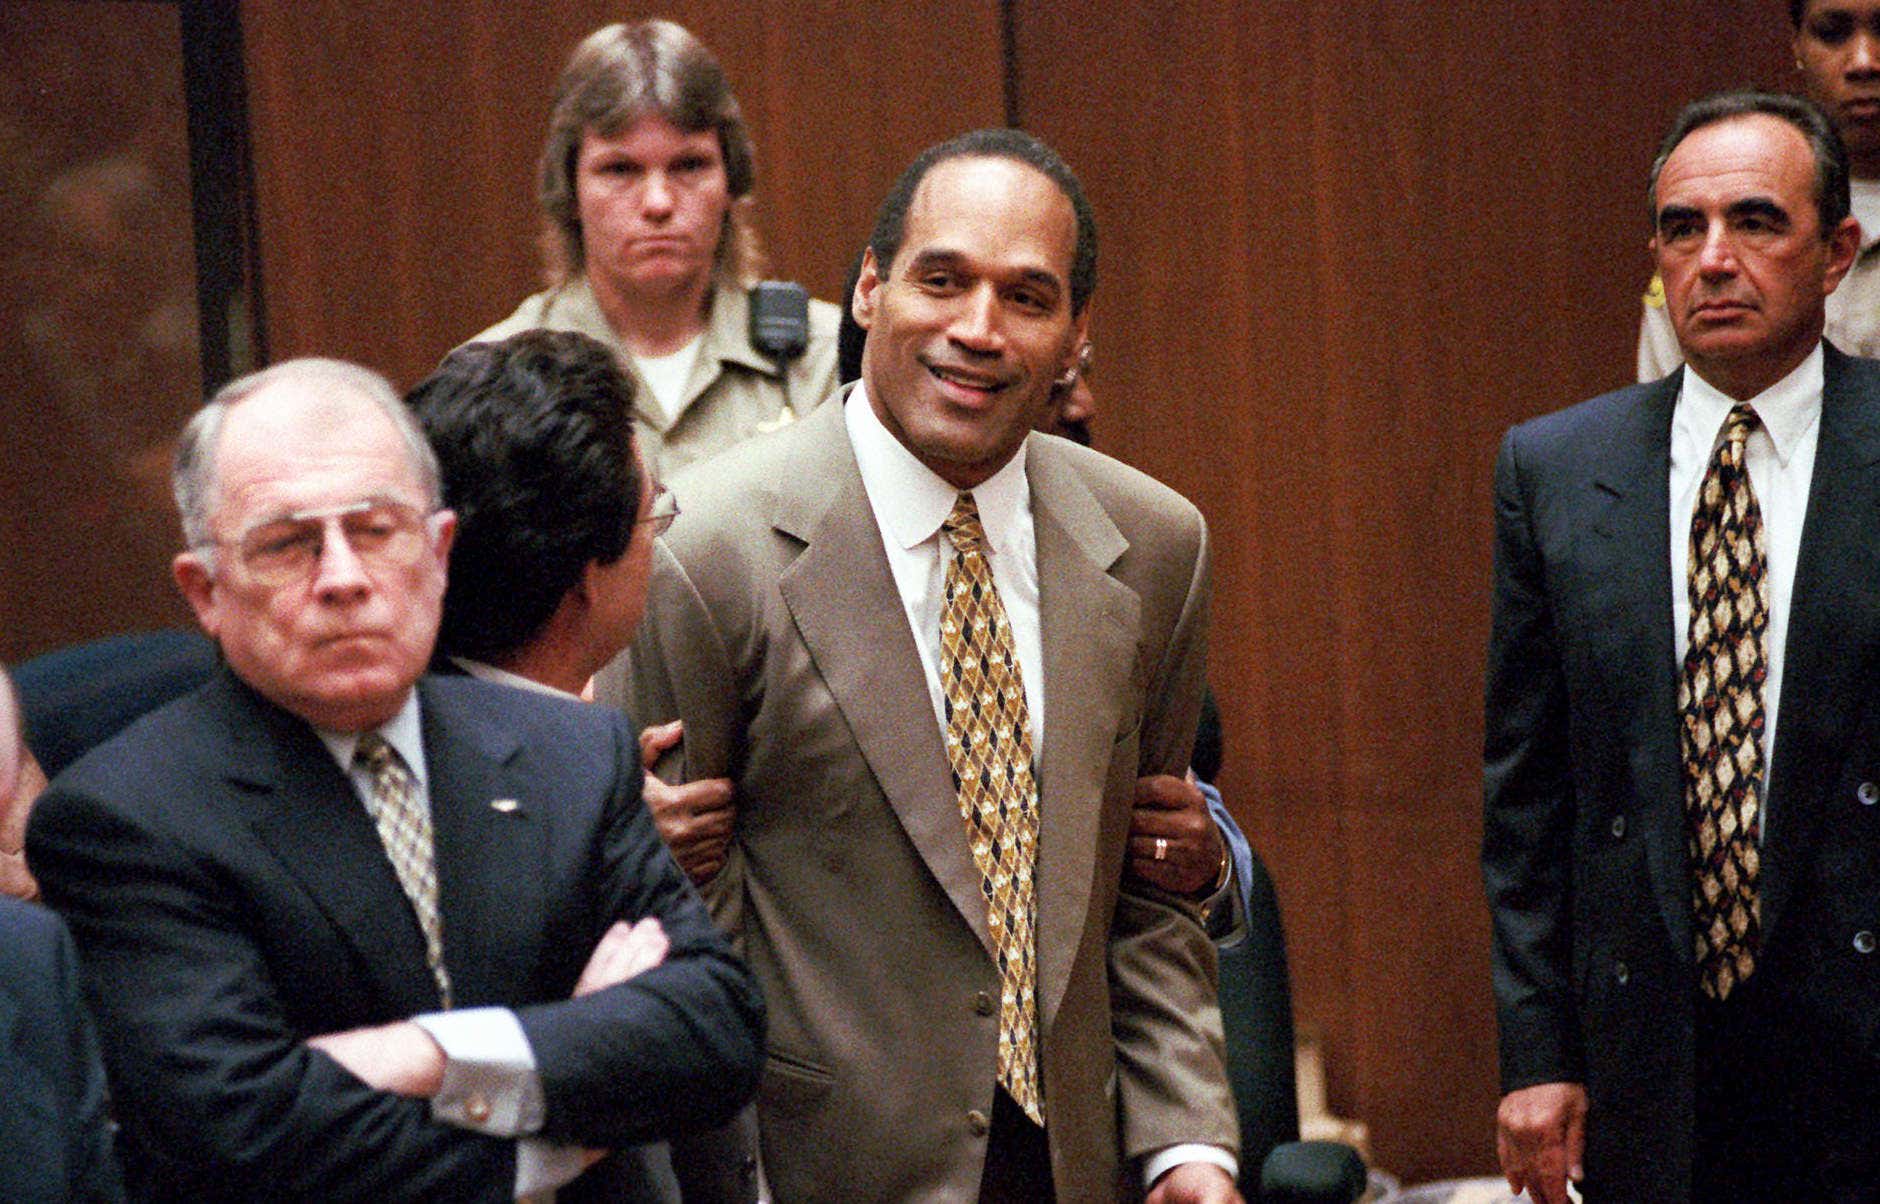 NBA commentator tells wild story about OJ Simpson slow-speed police ...